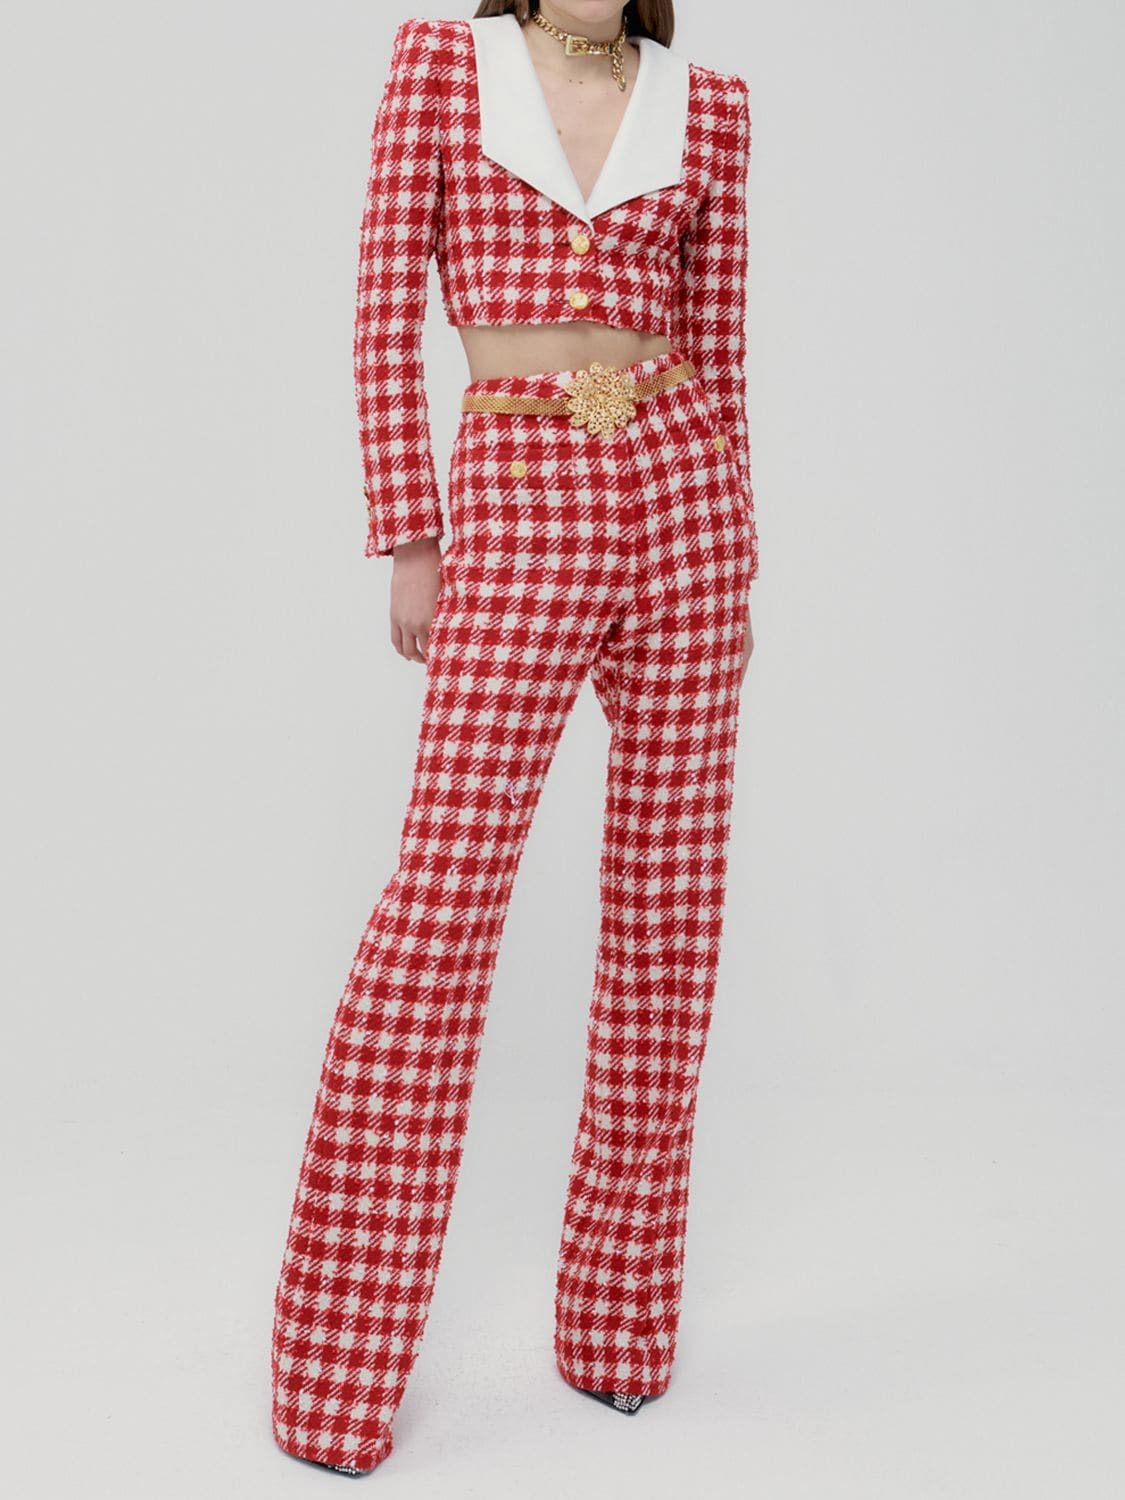 ALESSANDRA RICH Gingham Wool Blend Tweed Flared Pants in red / white